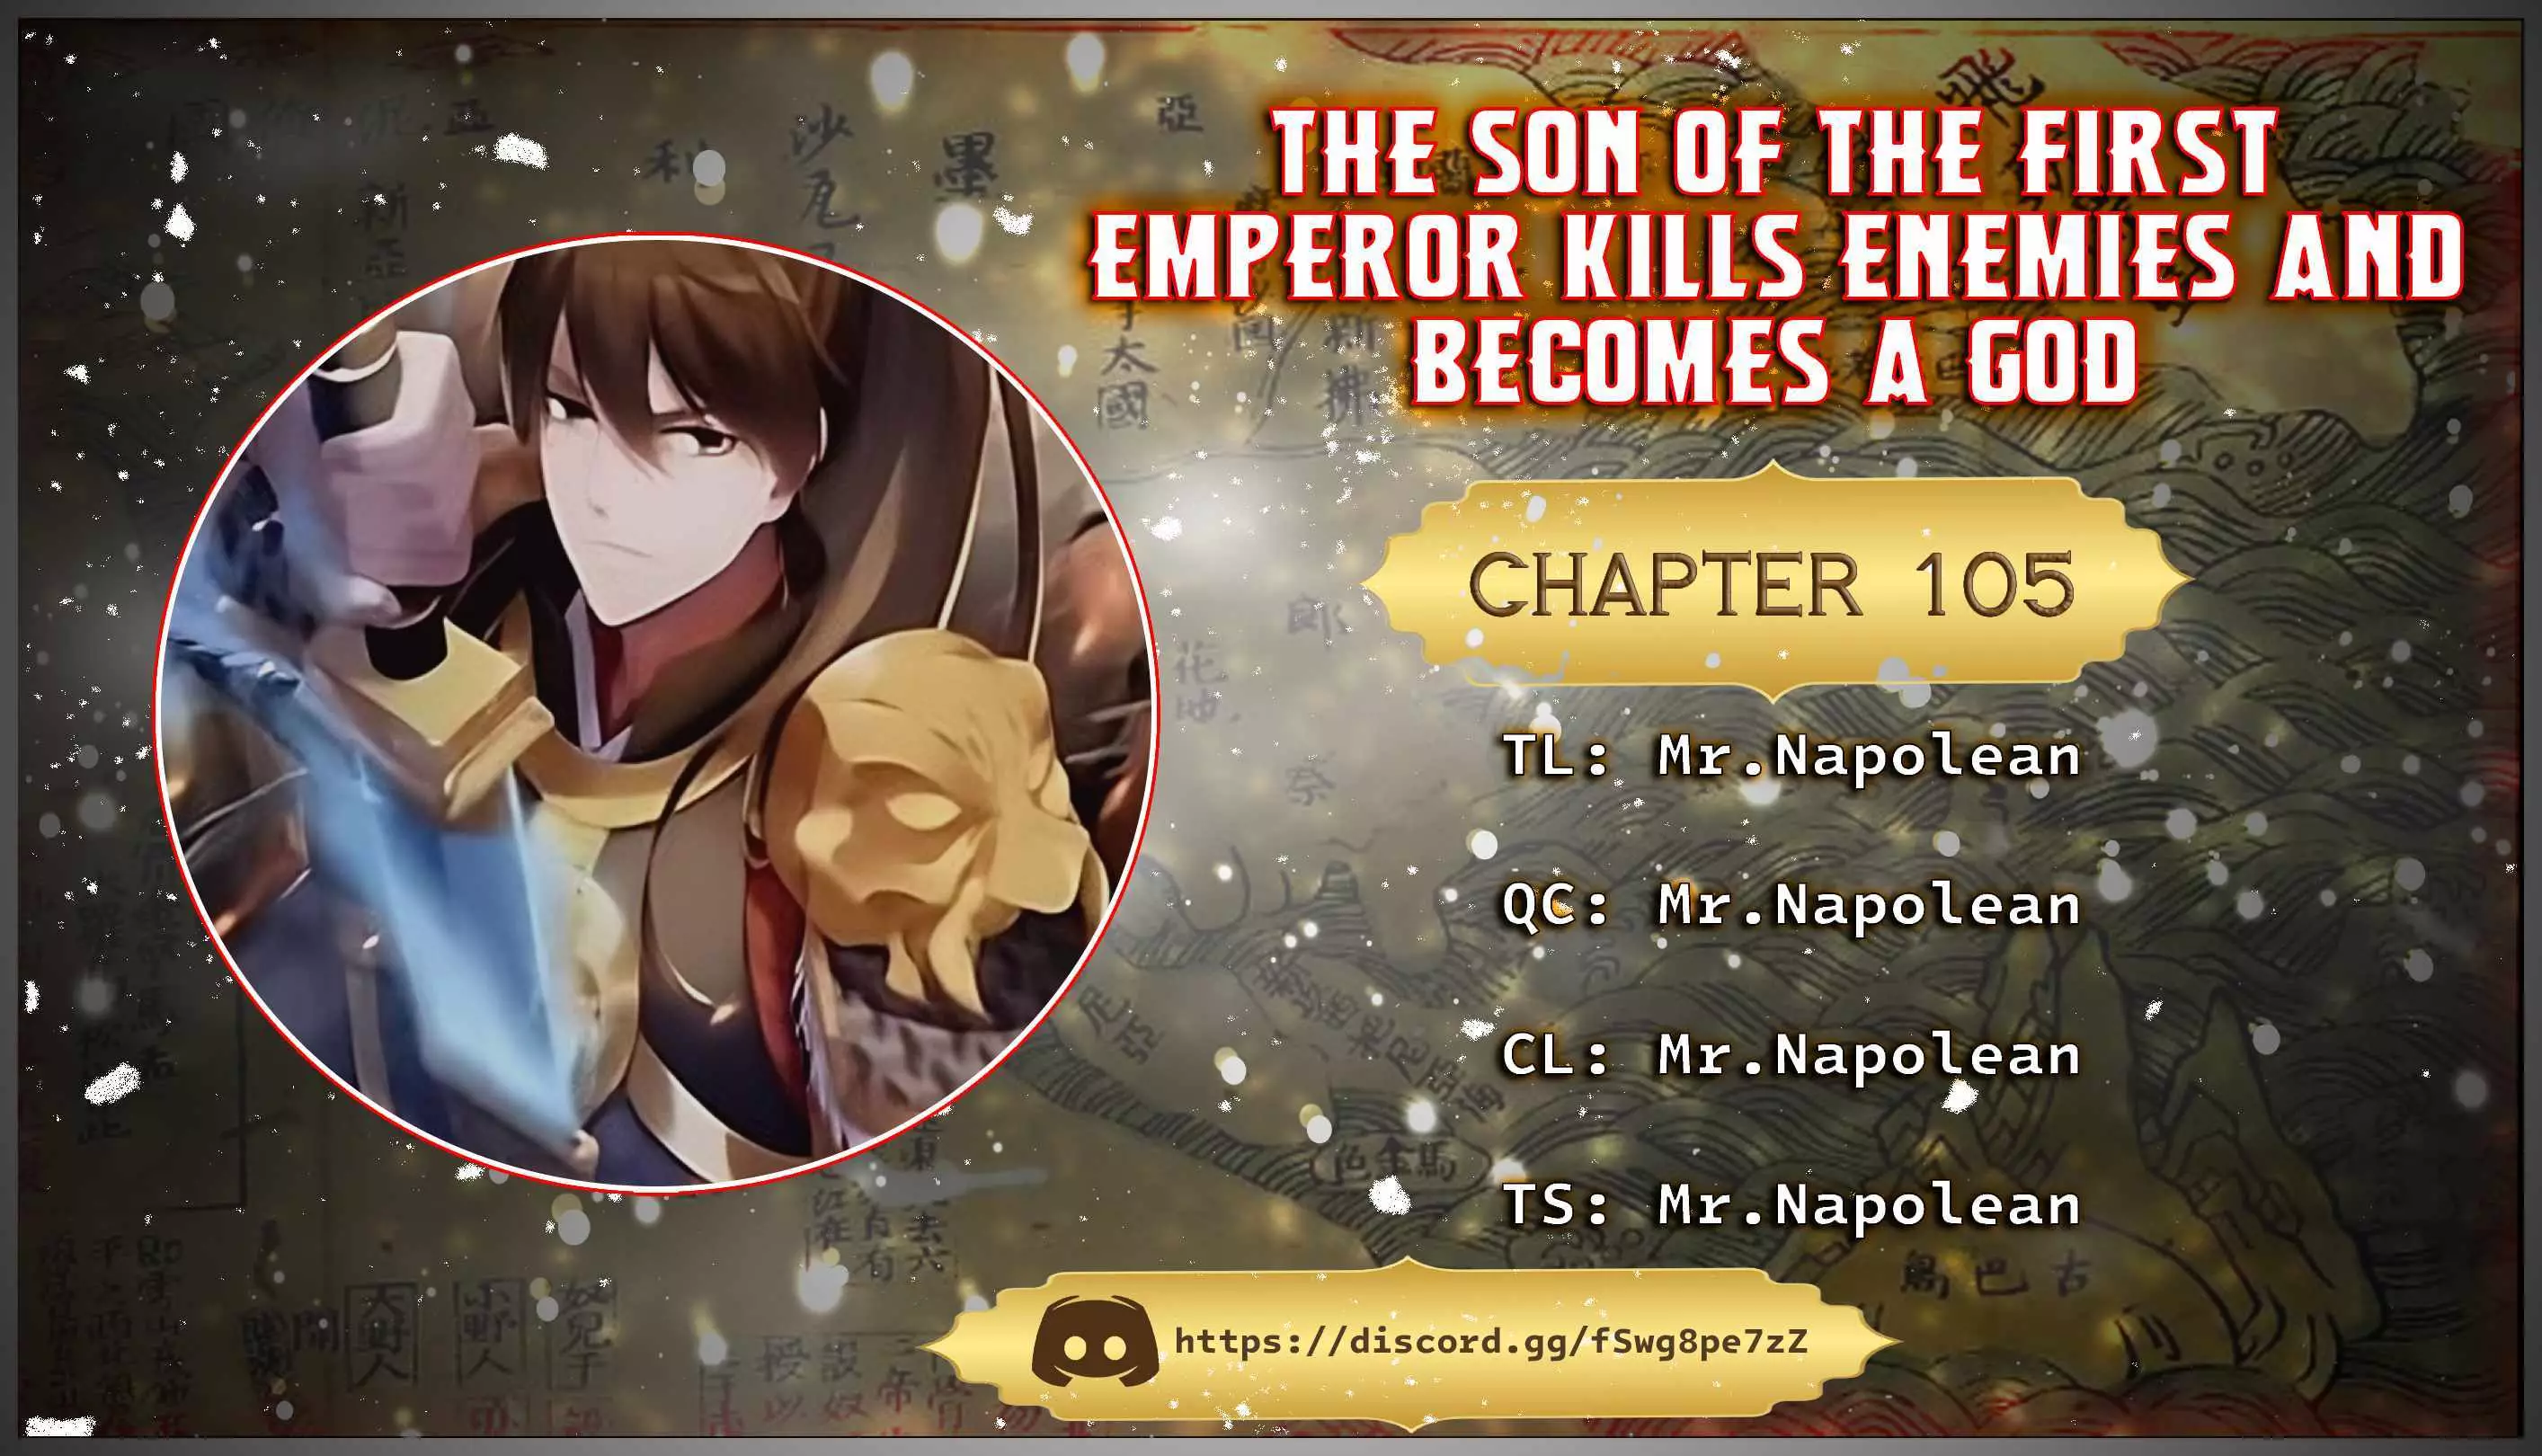 The Son Of The First Emperor Kills Enemies And Becomes A God - 105 page 1-24d9498b